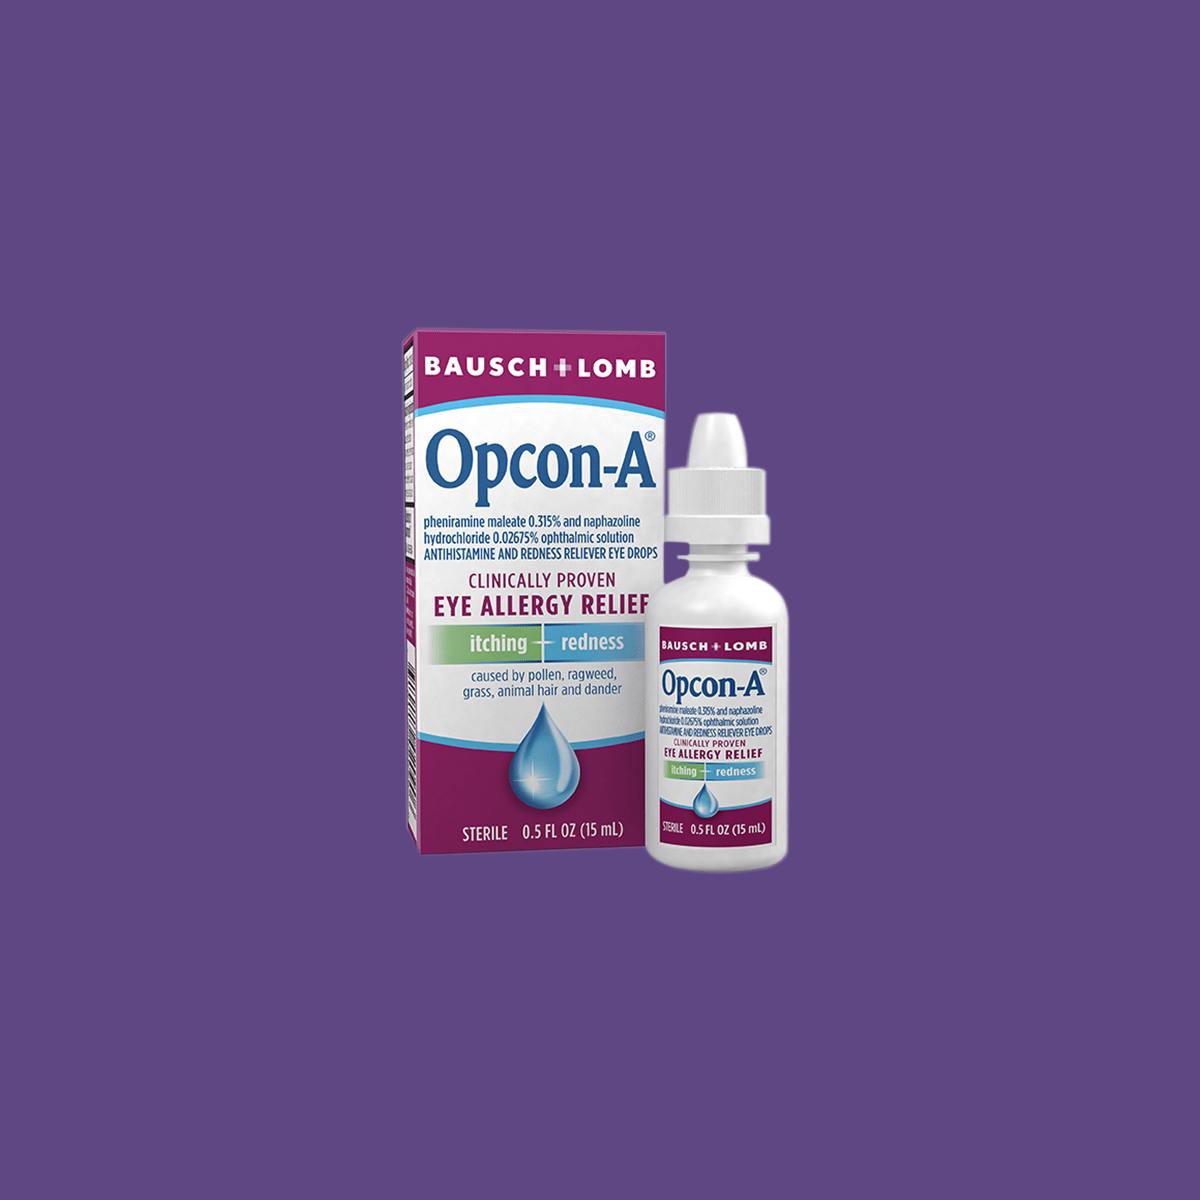 Bausch & Lomb Opcon-A Eye Drops for Allergy Relief 15mL - Dryeye Rescue